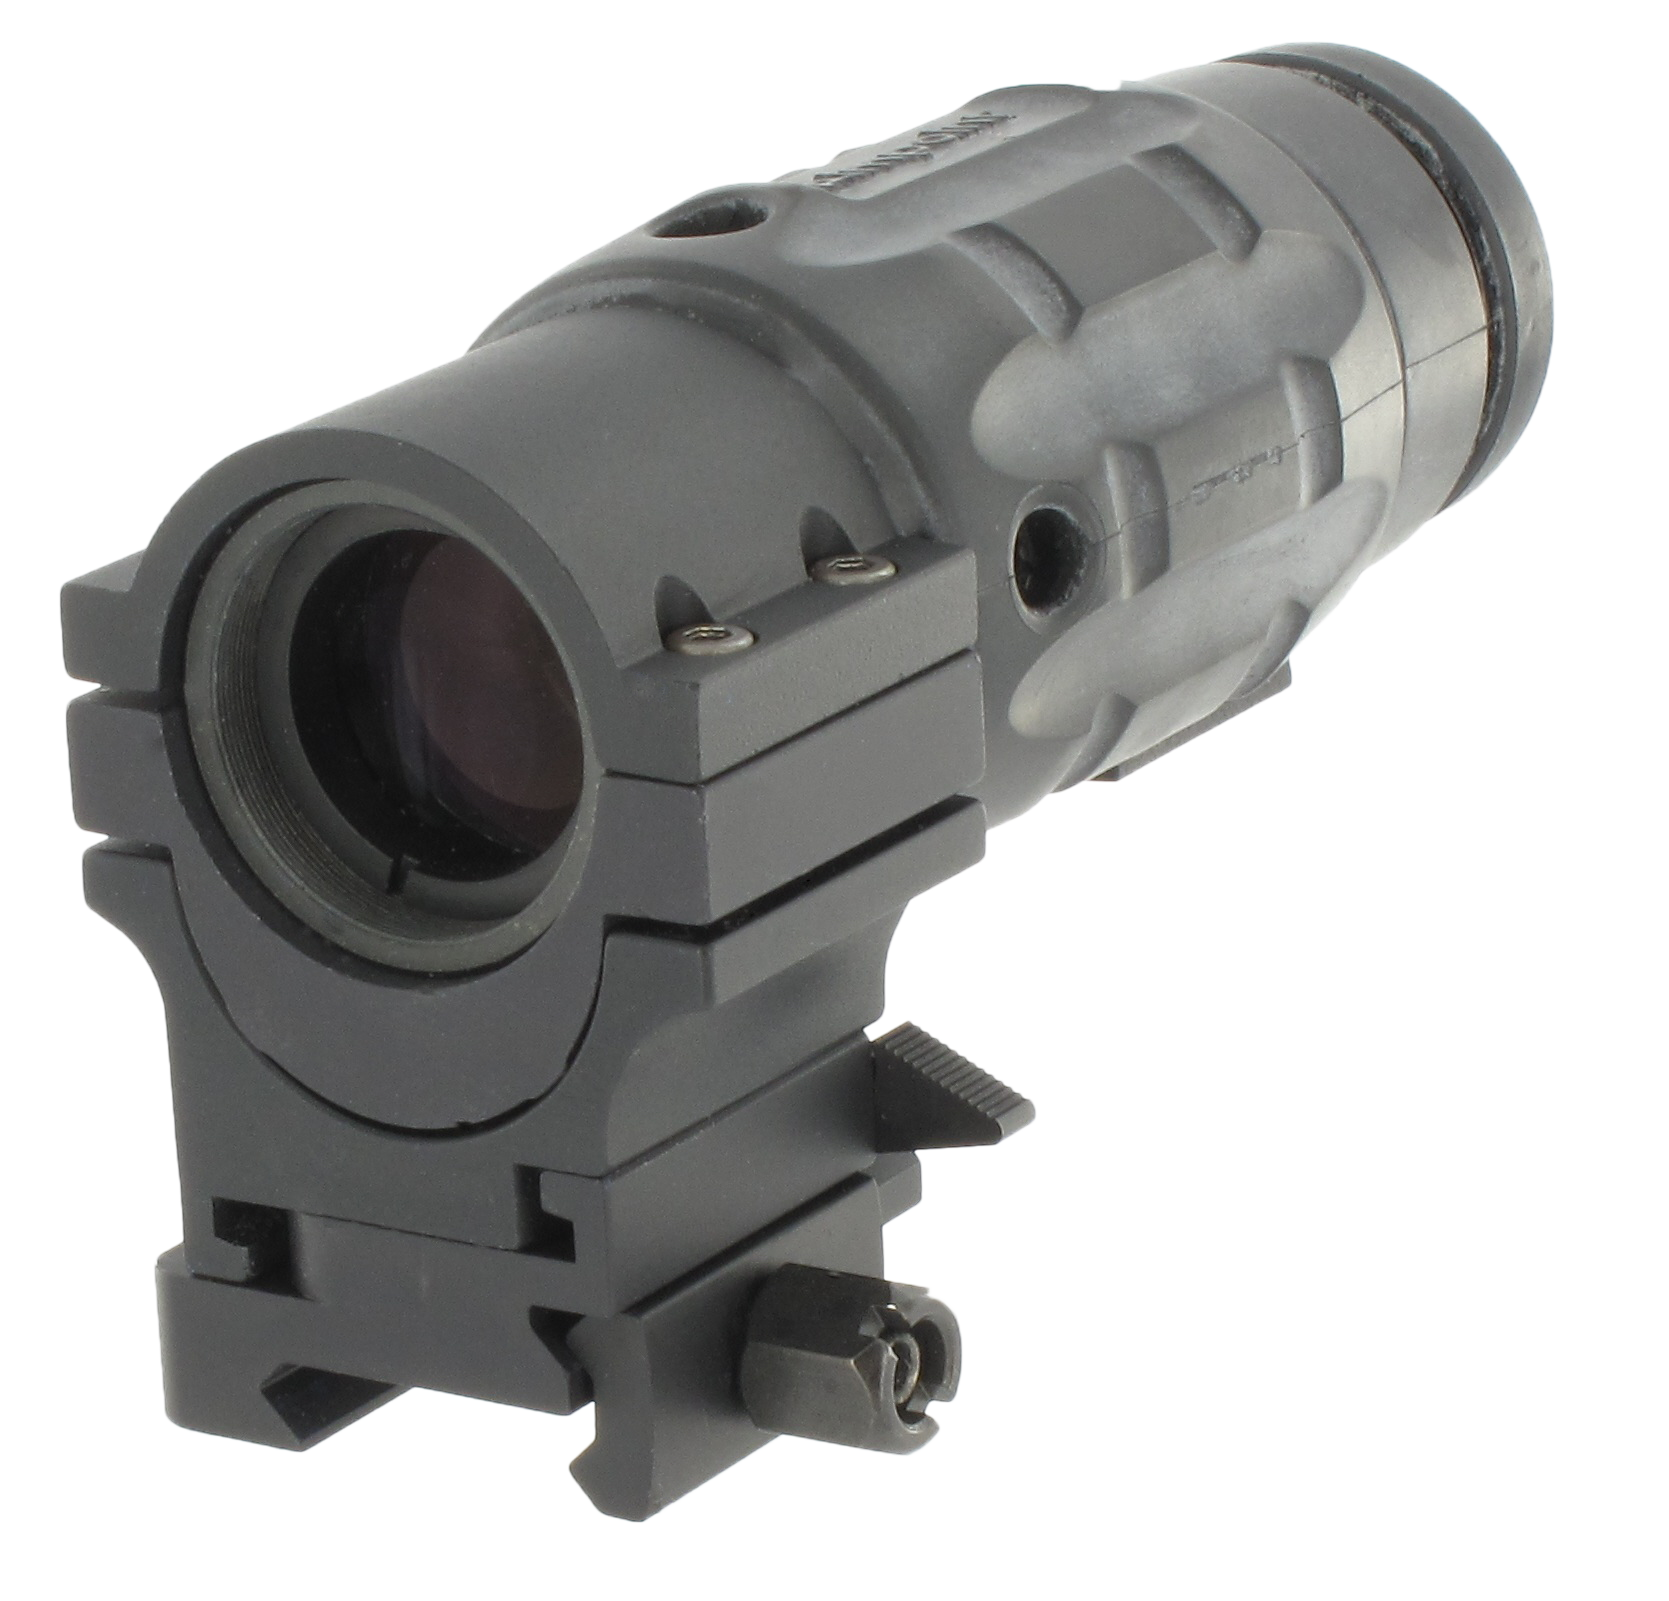 Aimpoint 3x Magnifier Twistmount (3XMAG-C)